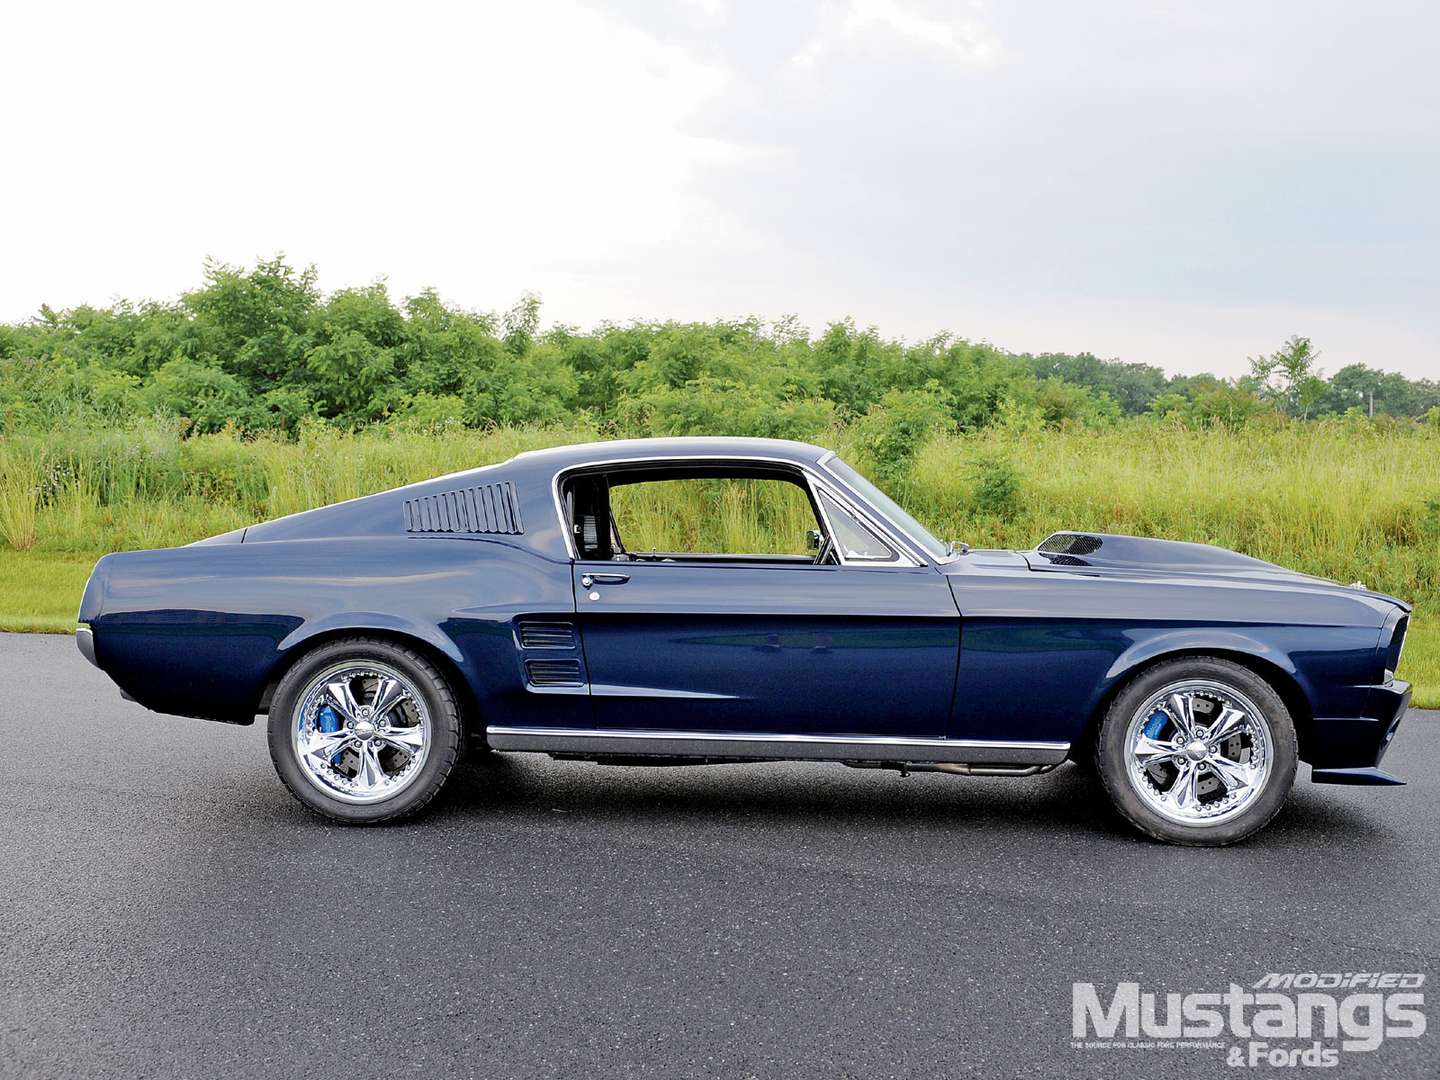 Ford Mustang fastback #9196178